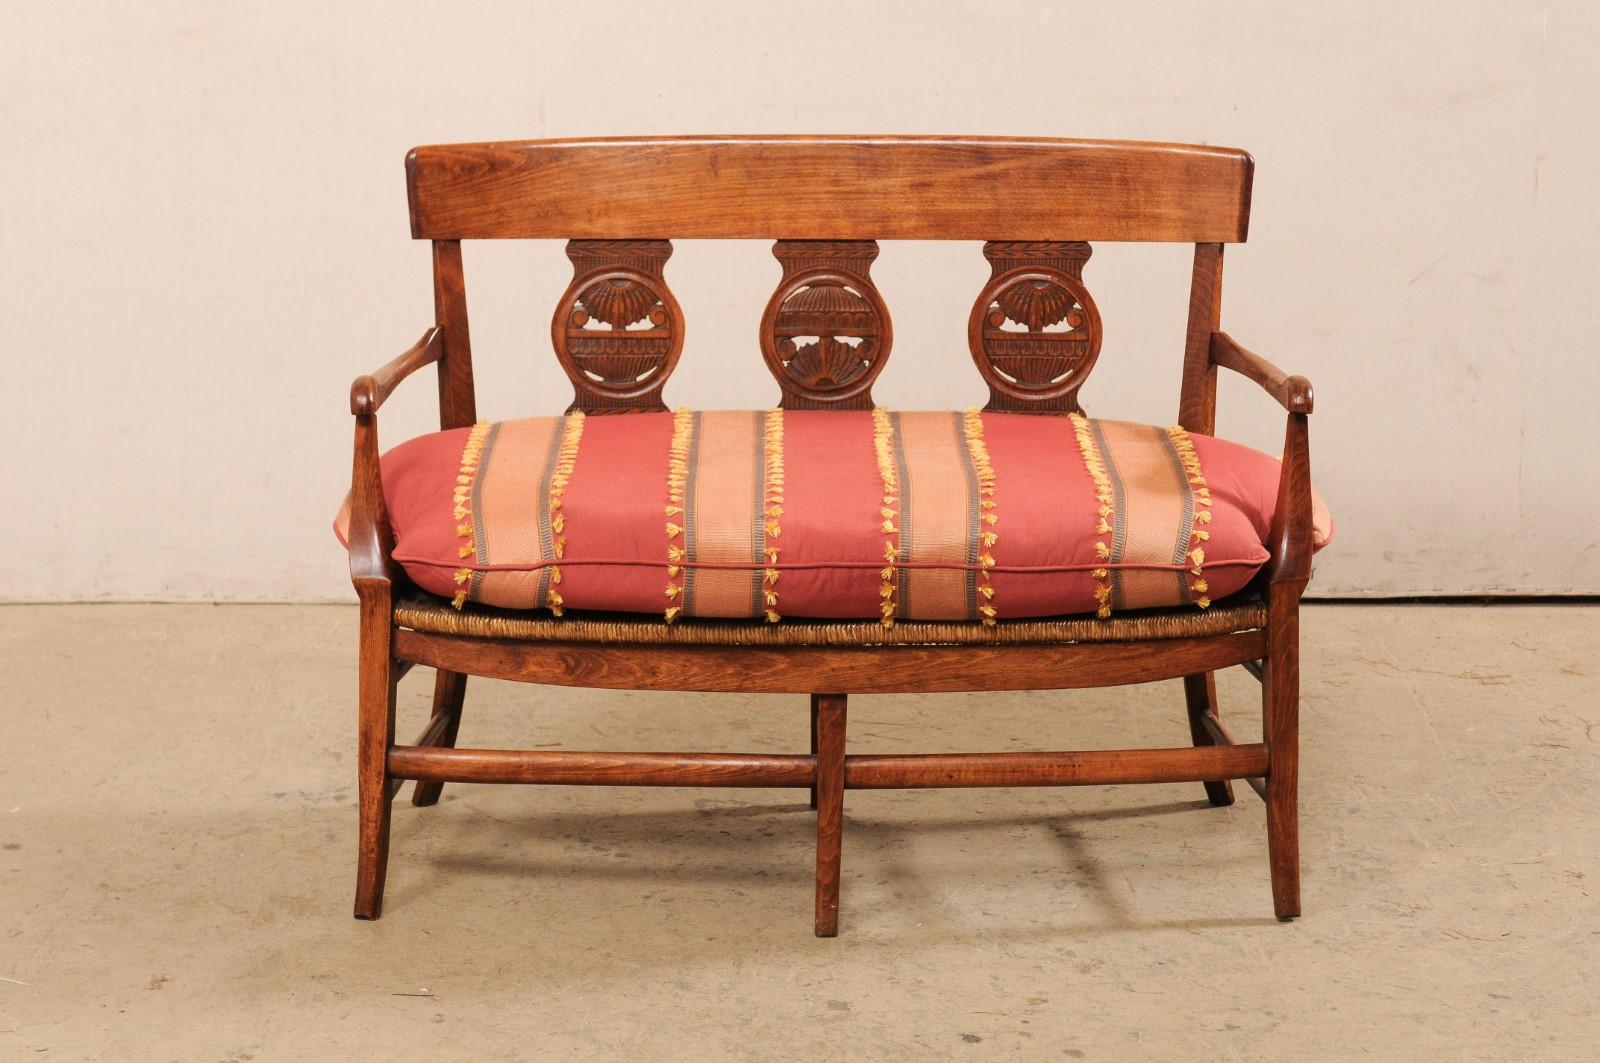 French Country Bench W/Neoclassic Elements Has Rushed Seat & Upholstered Cushion 3